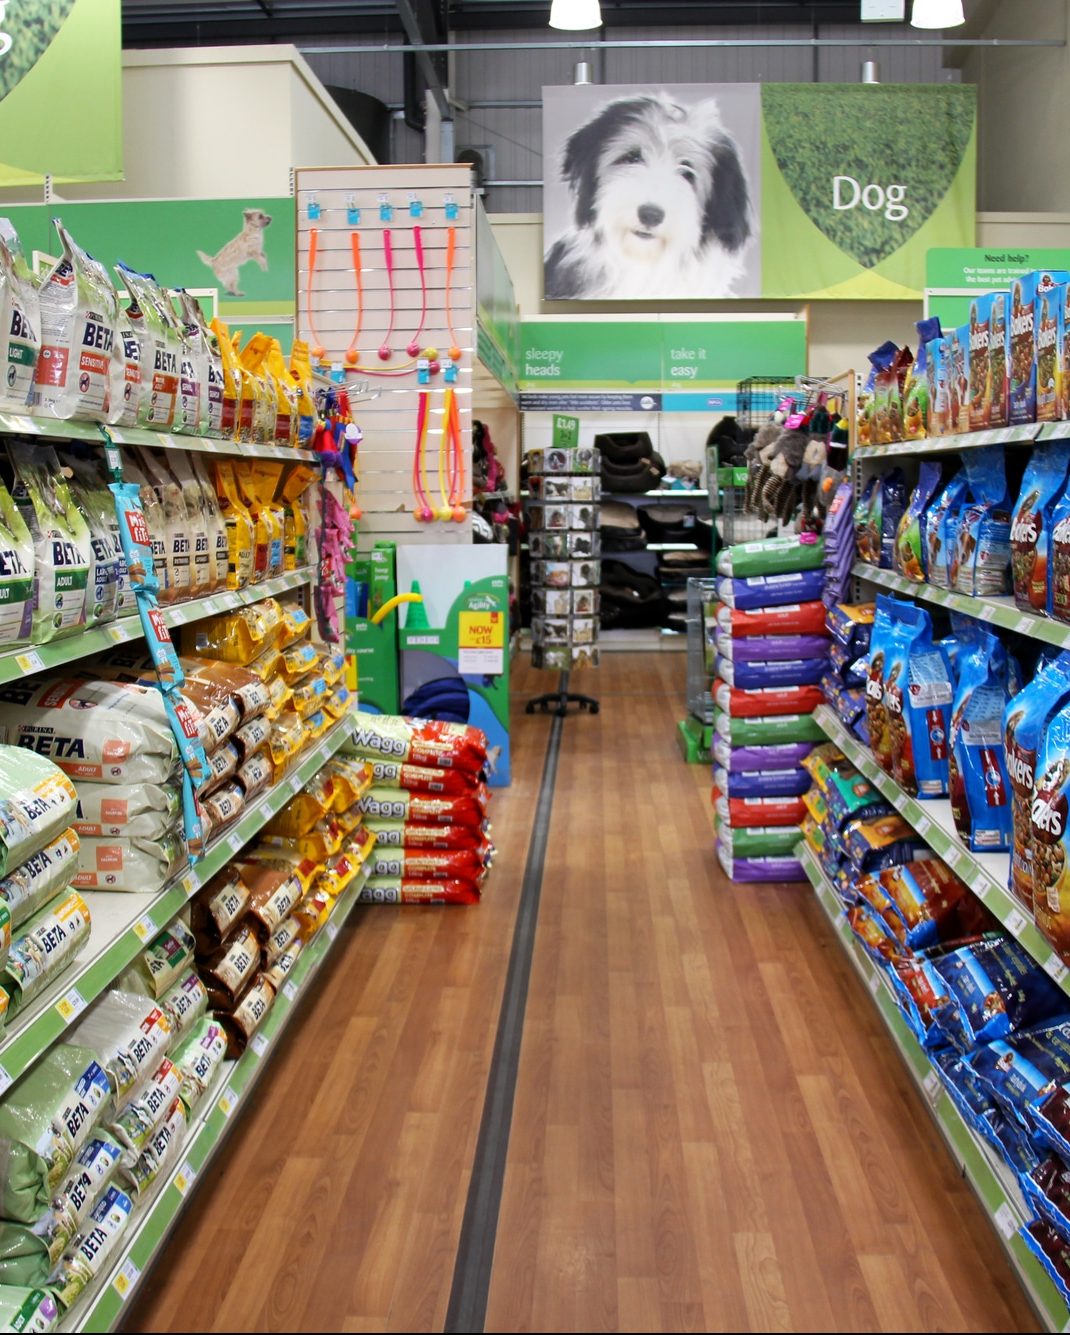 The dog food aisle at a pet store